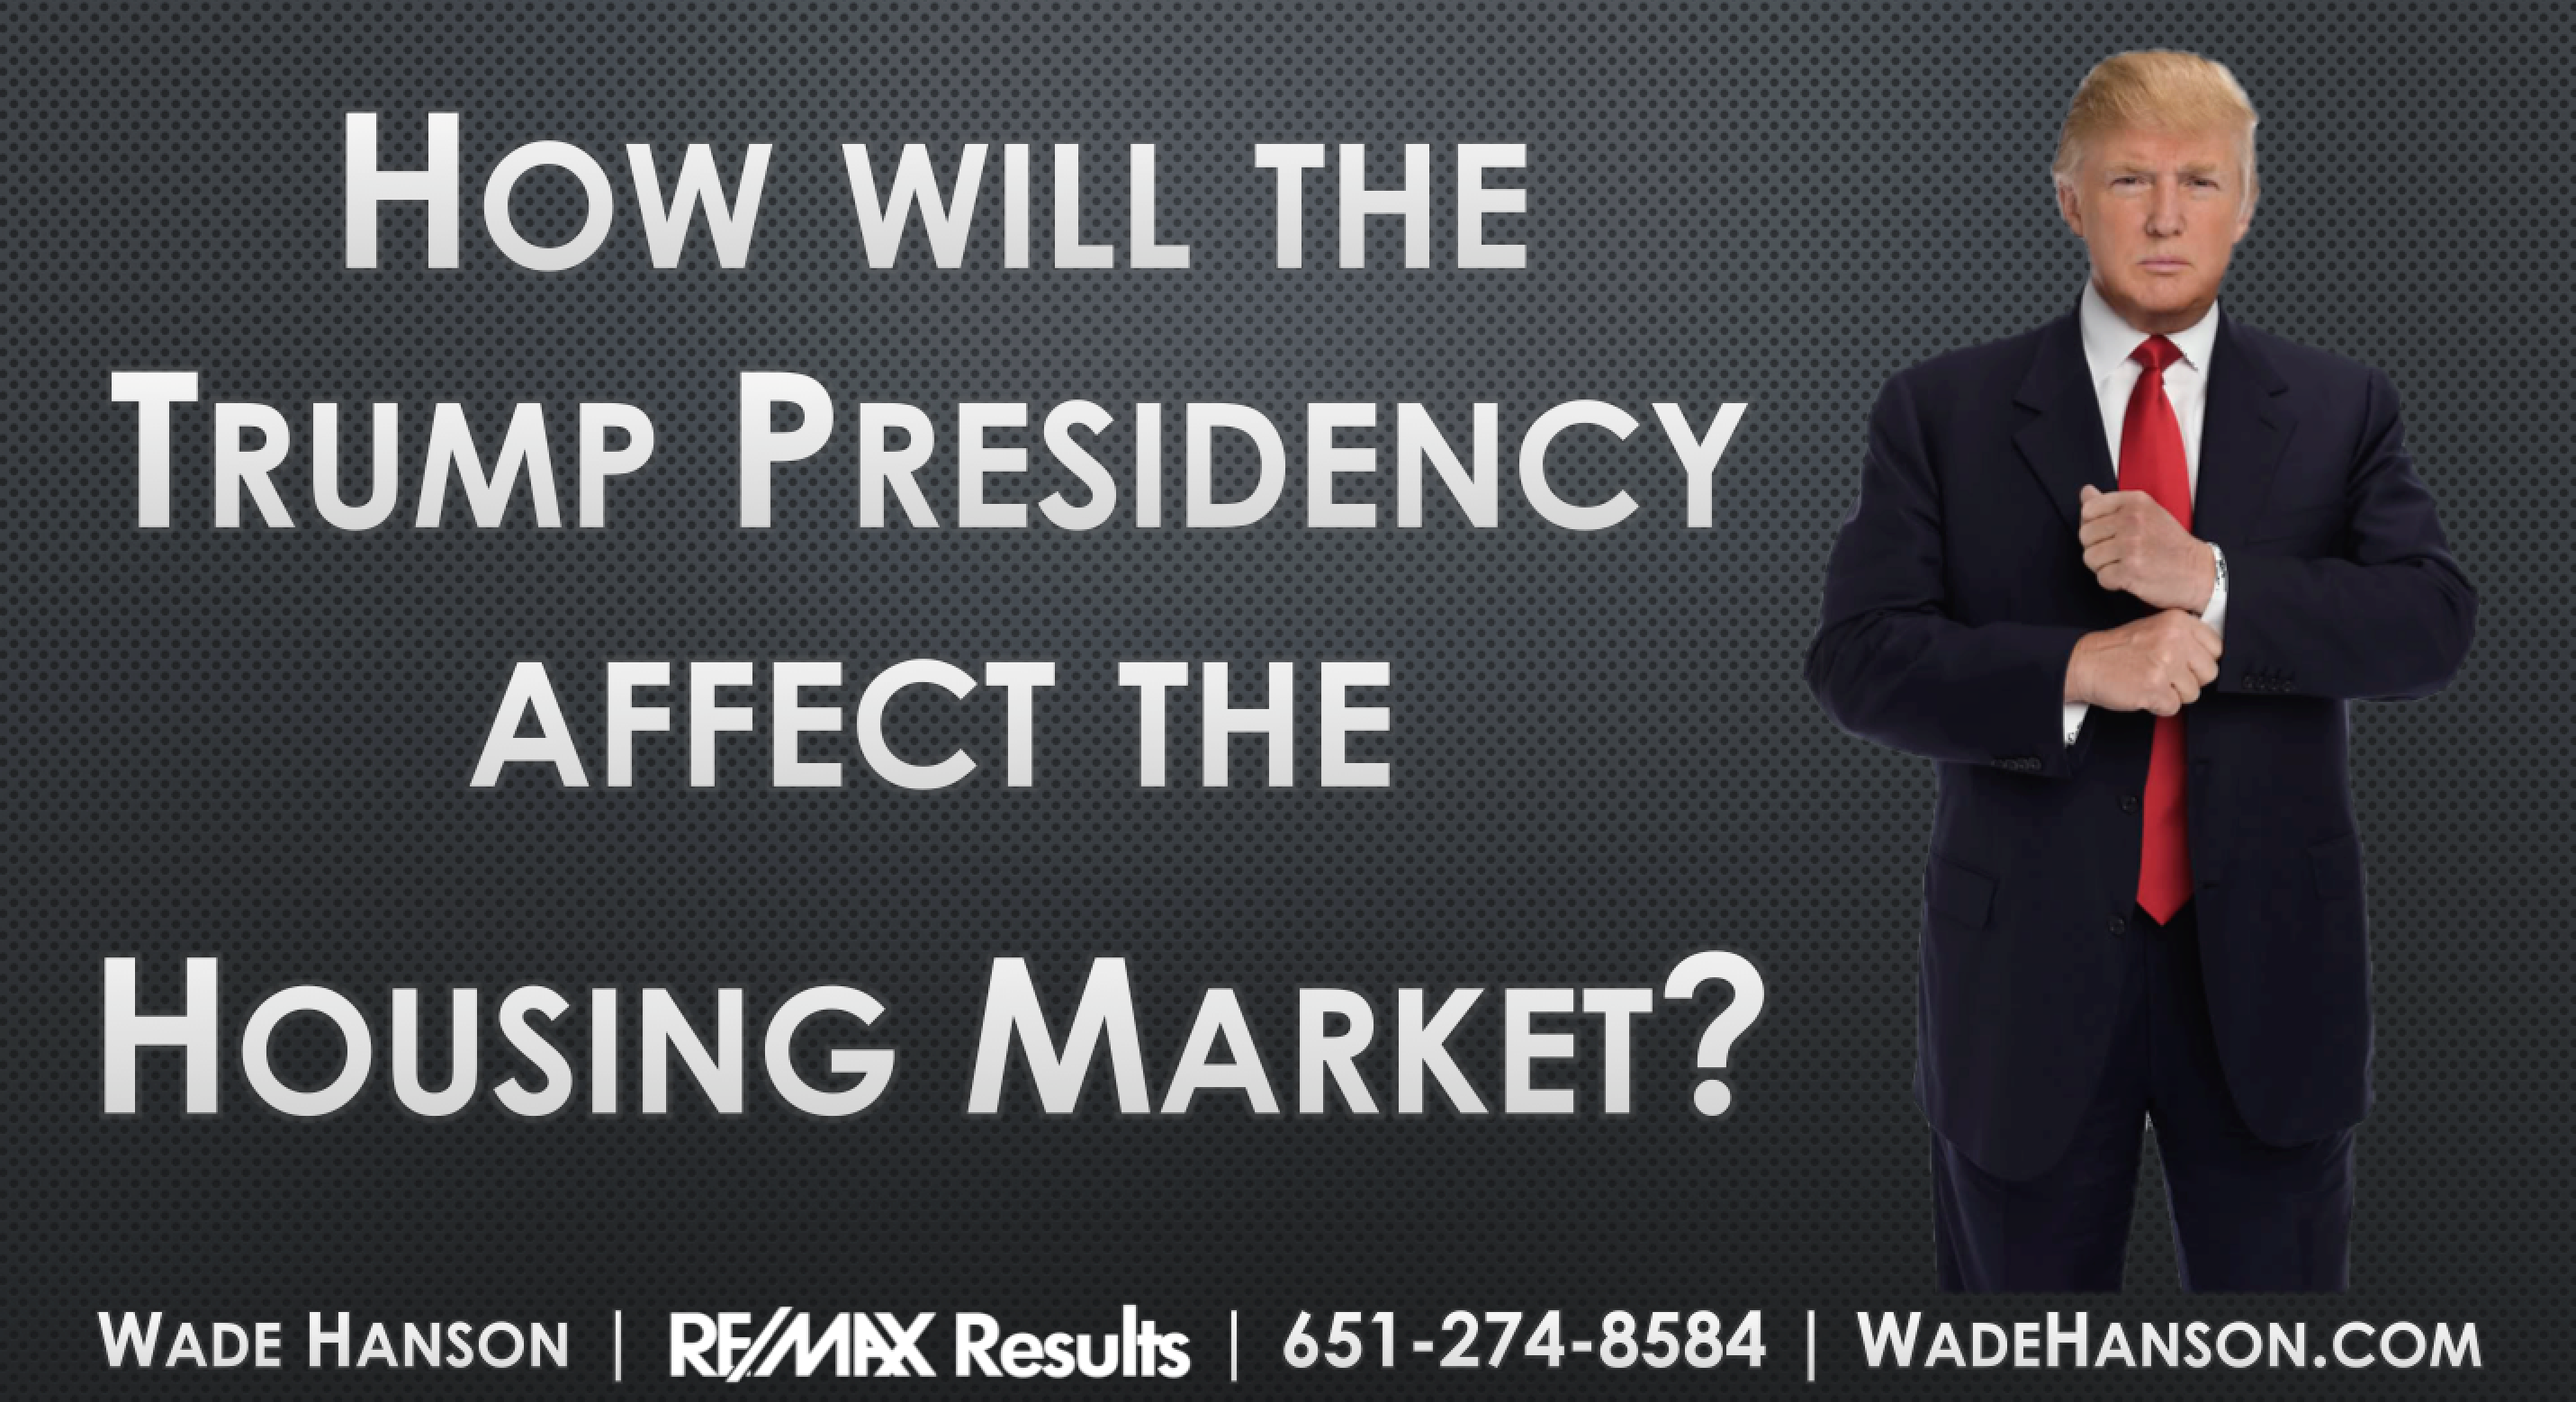 How Will a Trump Presidency Impact the Housing Market?